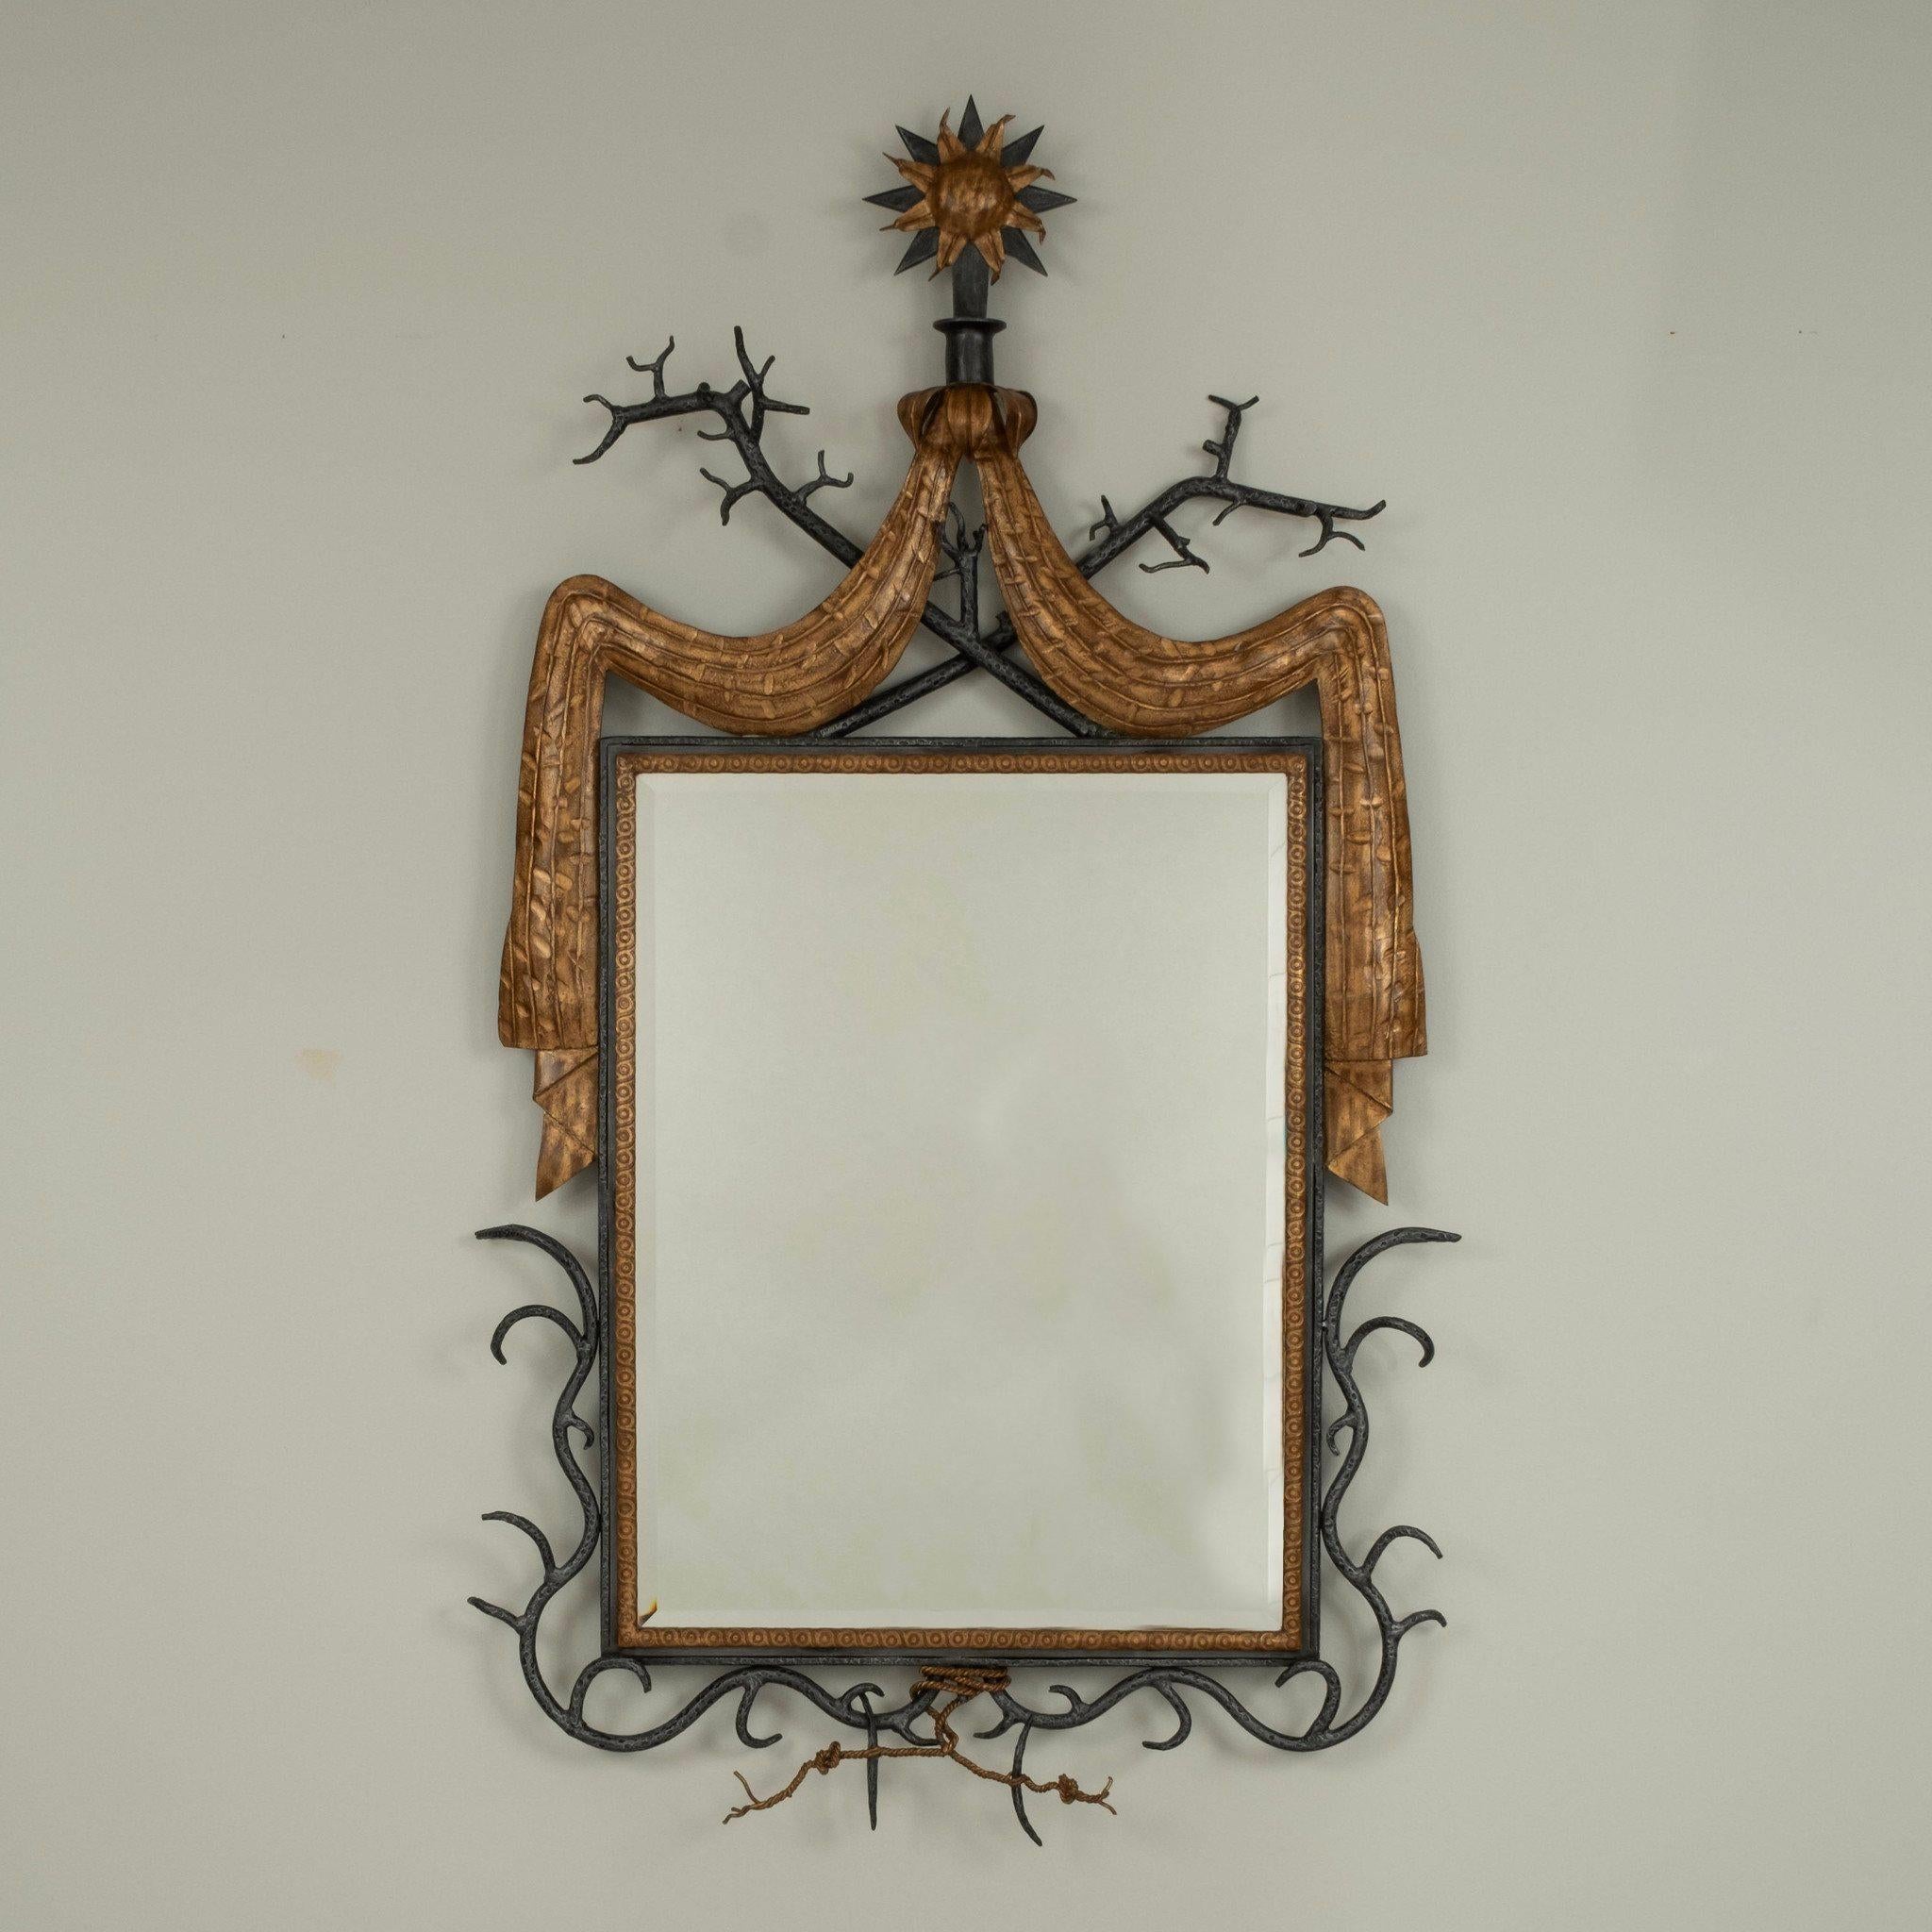 Beautiful French 1940s Poillerat style wrought iron and gold trimmed wall mirror with sun, branch, twig and swag detail.